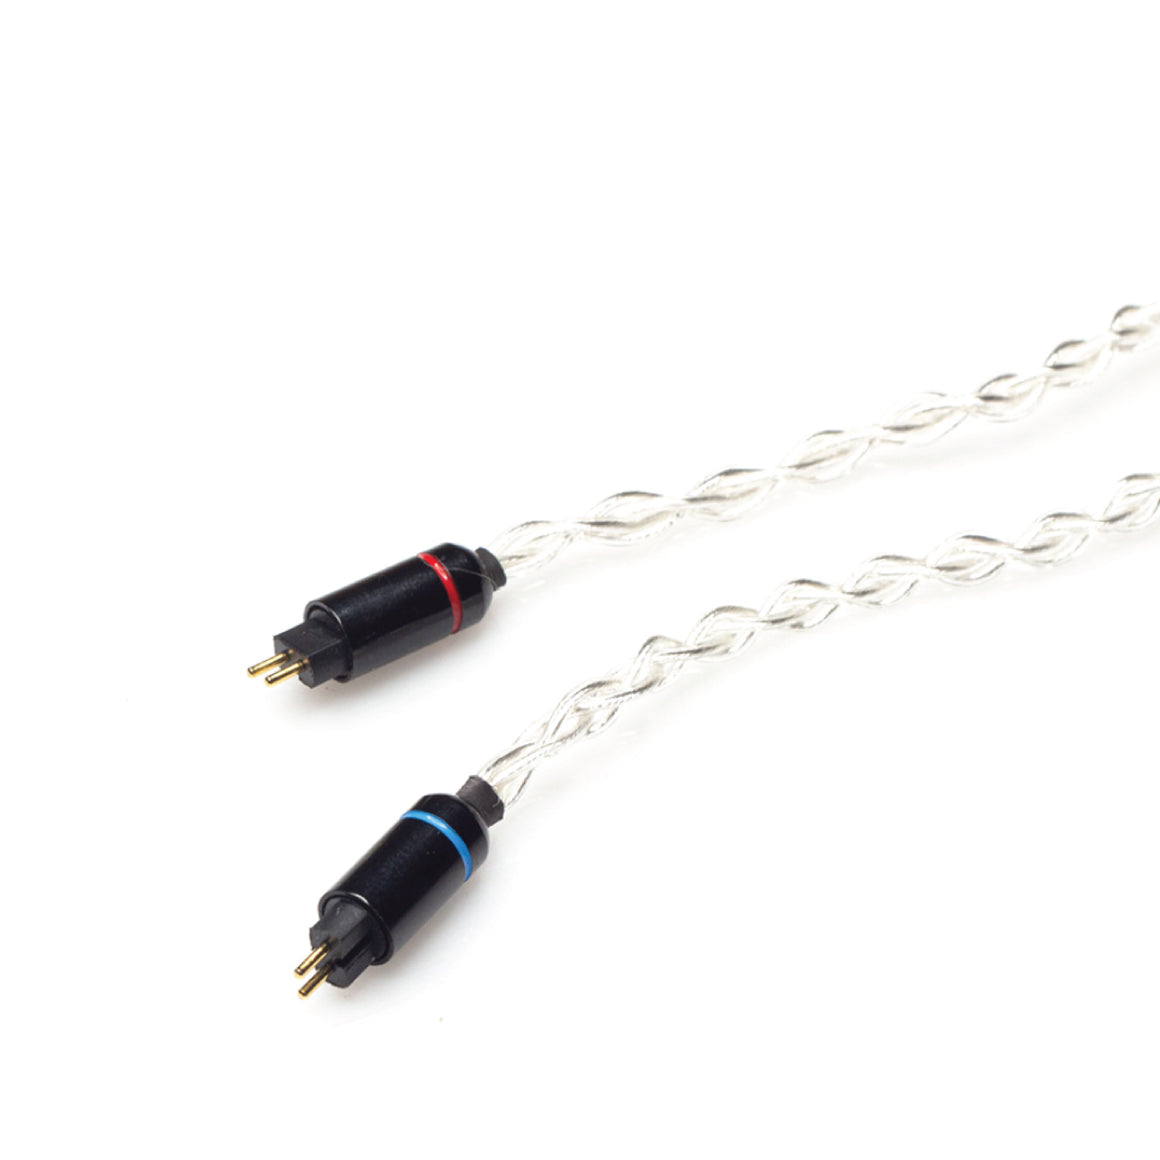 Headphone Zone - 2 PIN Cable for IEM